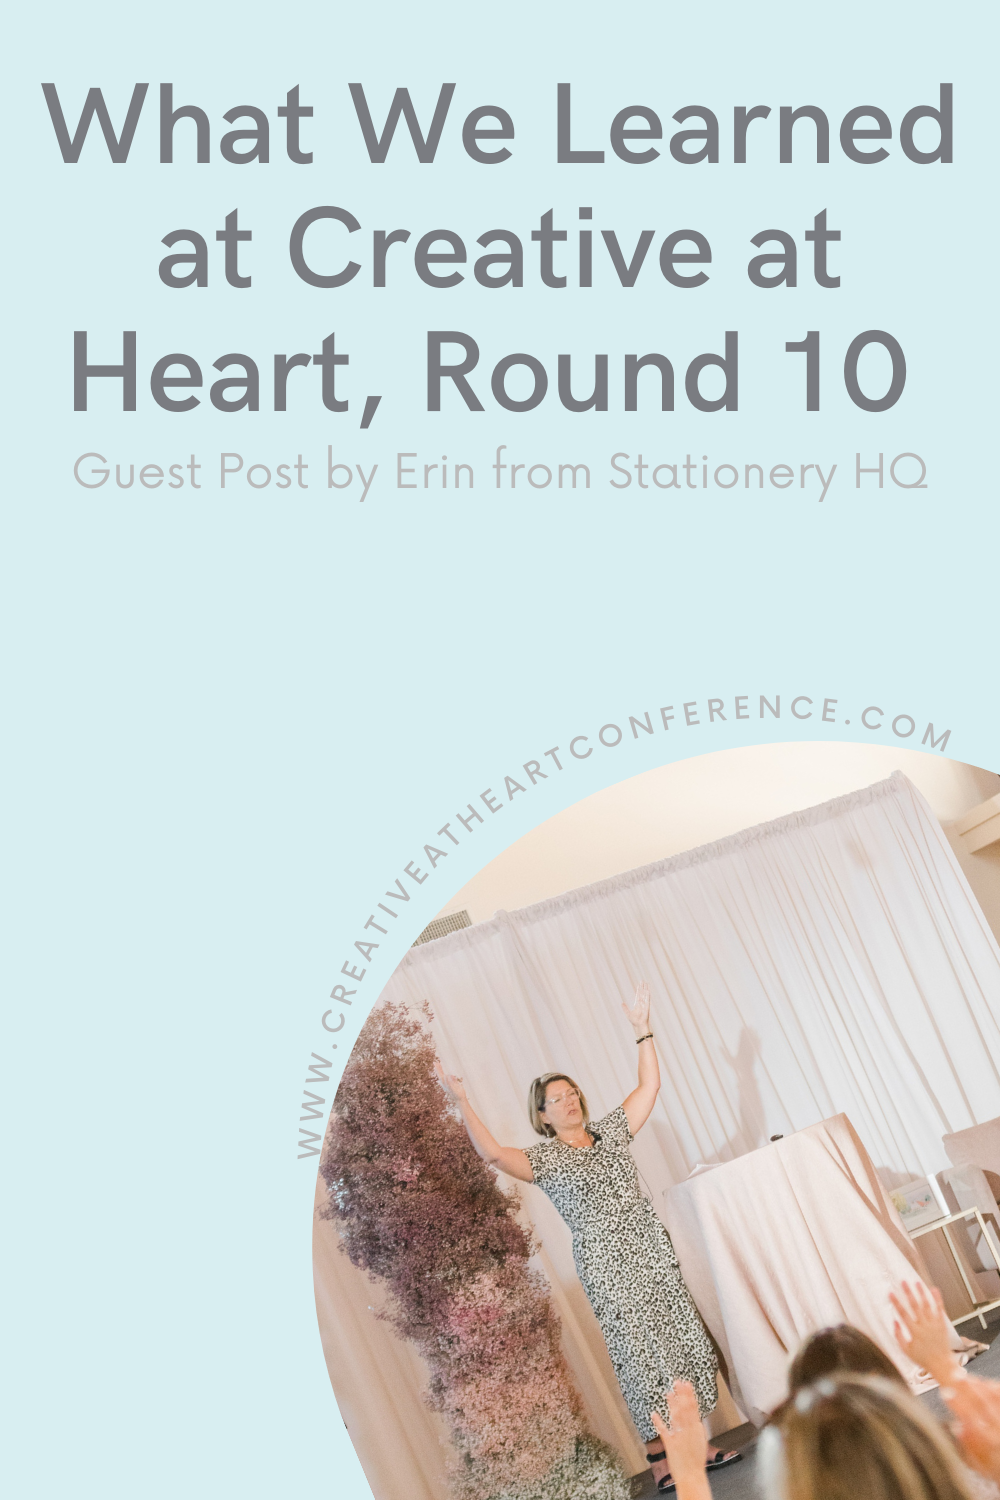 3 Things we learned from Creative at Heart Conference: Owner of Stationery HQ shares what she learned from attending C@H Round 10 as a creative entrepreneur. Guest post on Creative at Heart blog